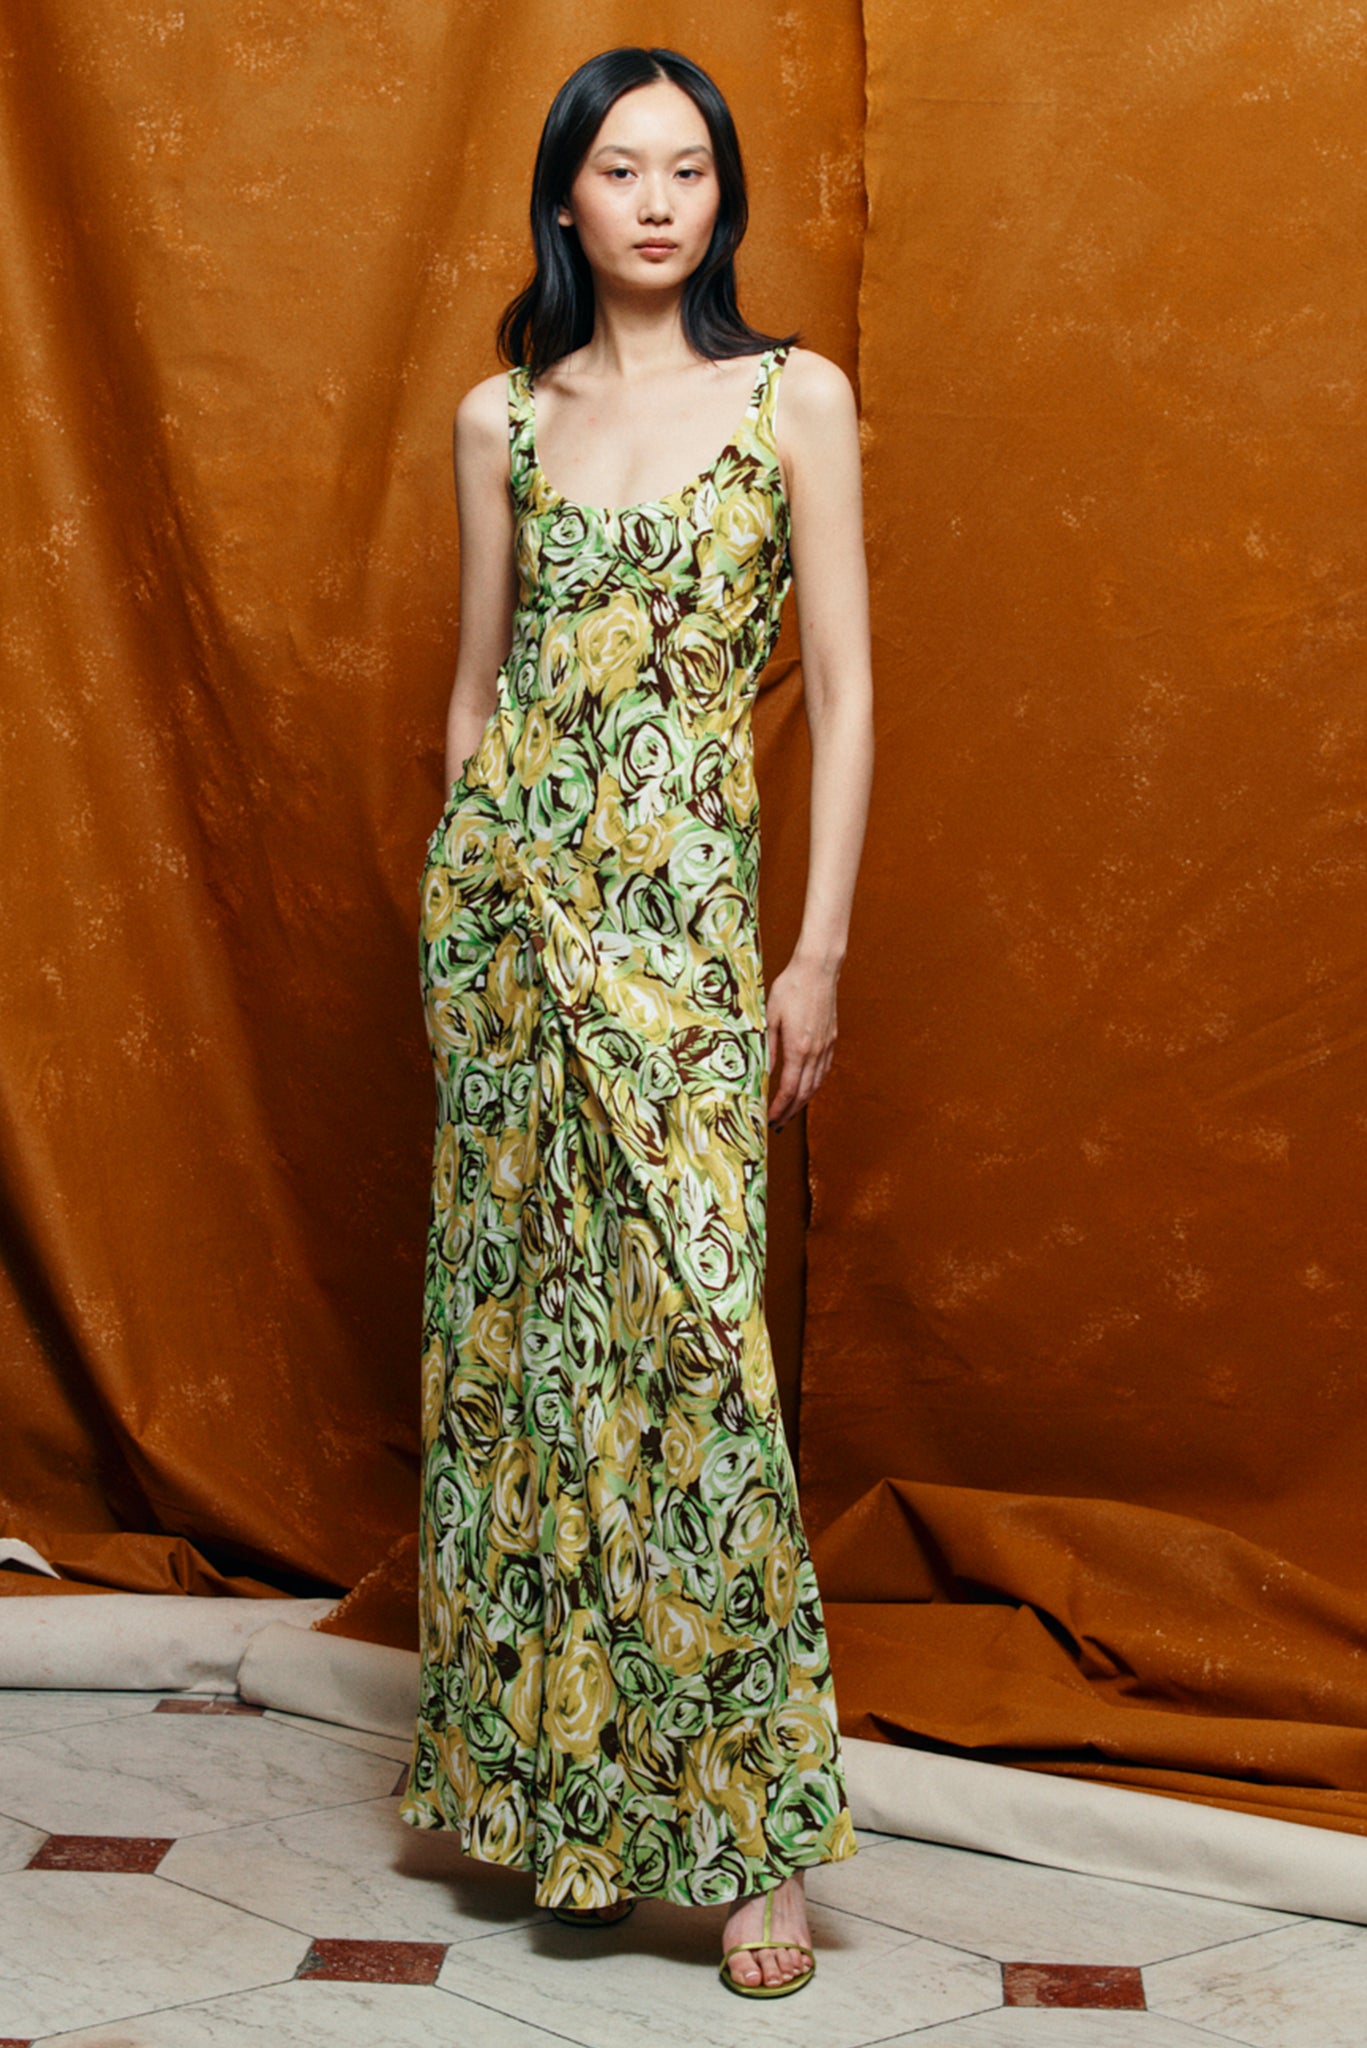 Barlow Dress In Abstract Green And Lemon Rose Printed Twill | Emilia Wickstead